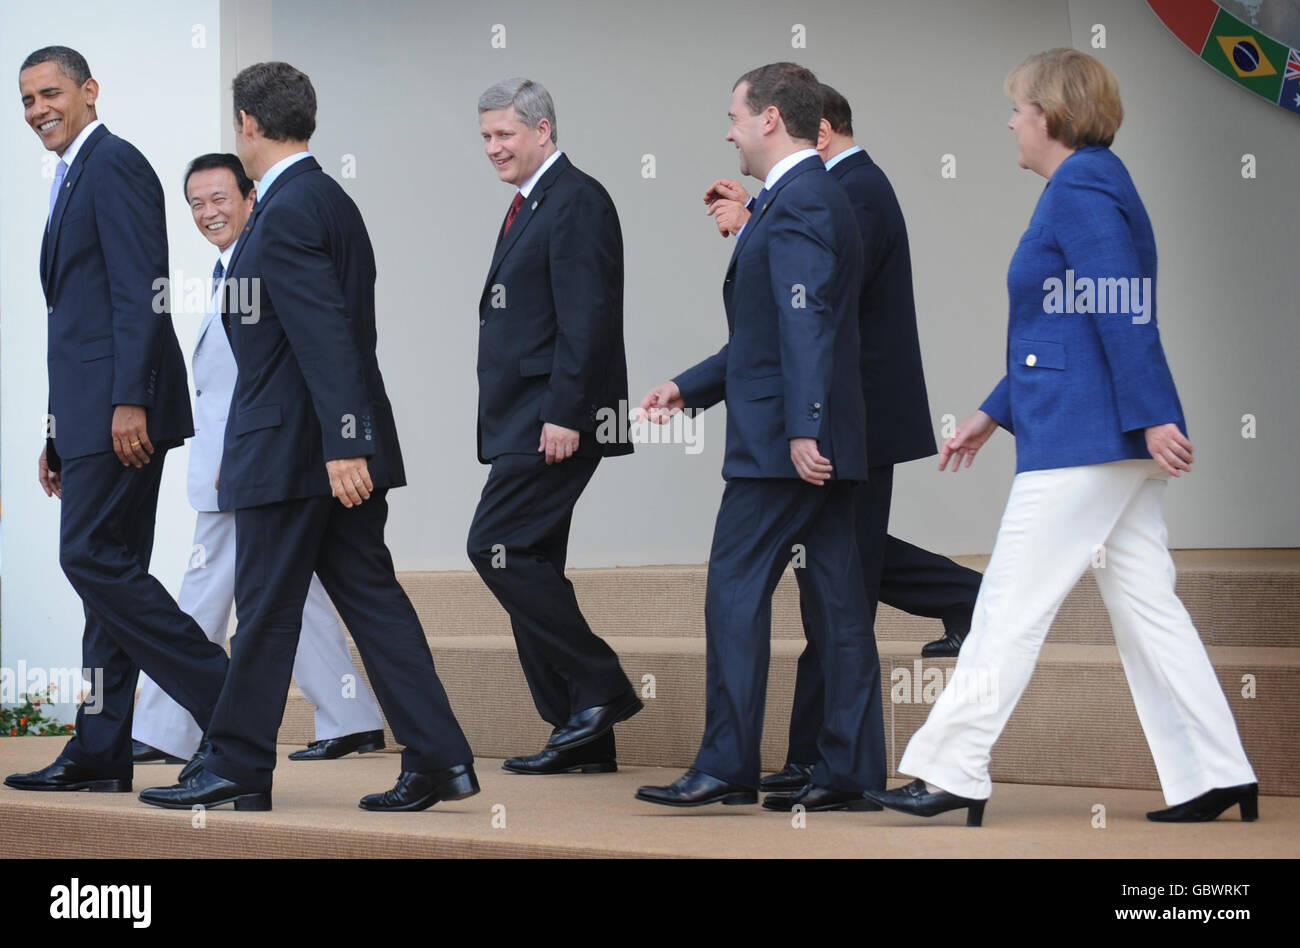 G8 leaders leave the stage after posing for their family photo (from left to right) President of the USA Barack Obama, Japanese Prime Minister Taro Aso, French President Nicolas Sarkozy, Canadian Prime Minister Stephen Harper, President of Russia Dmitry Medvedev, Prime Minister Silvio Berlusconi and Chancellor of Germany Angela Merkel at the G8 Summit in L'Aquila today. Stock Photo